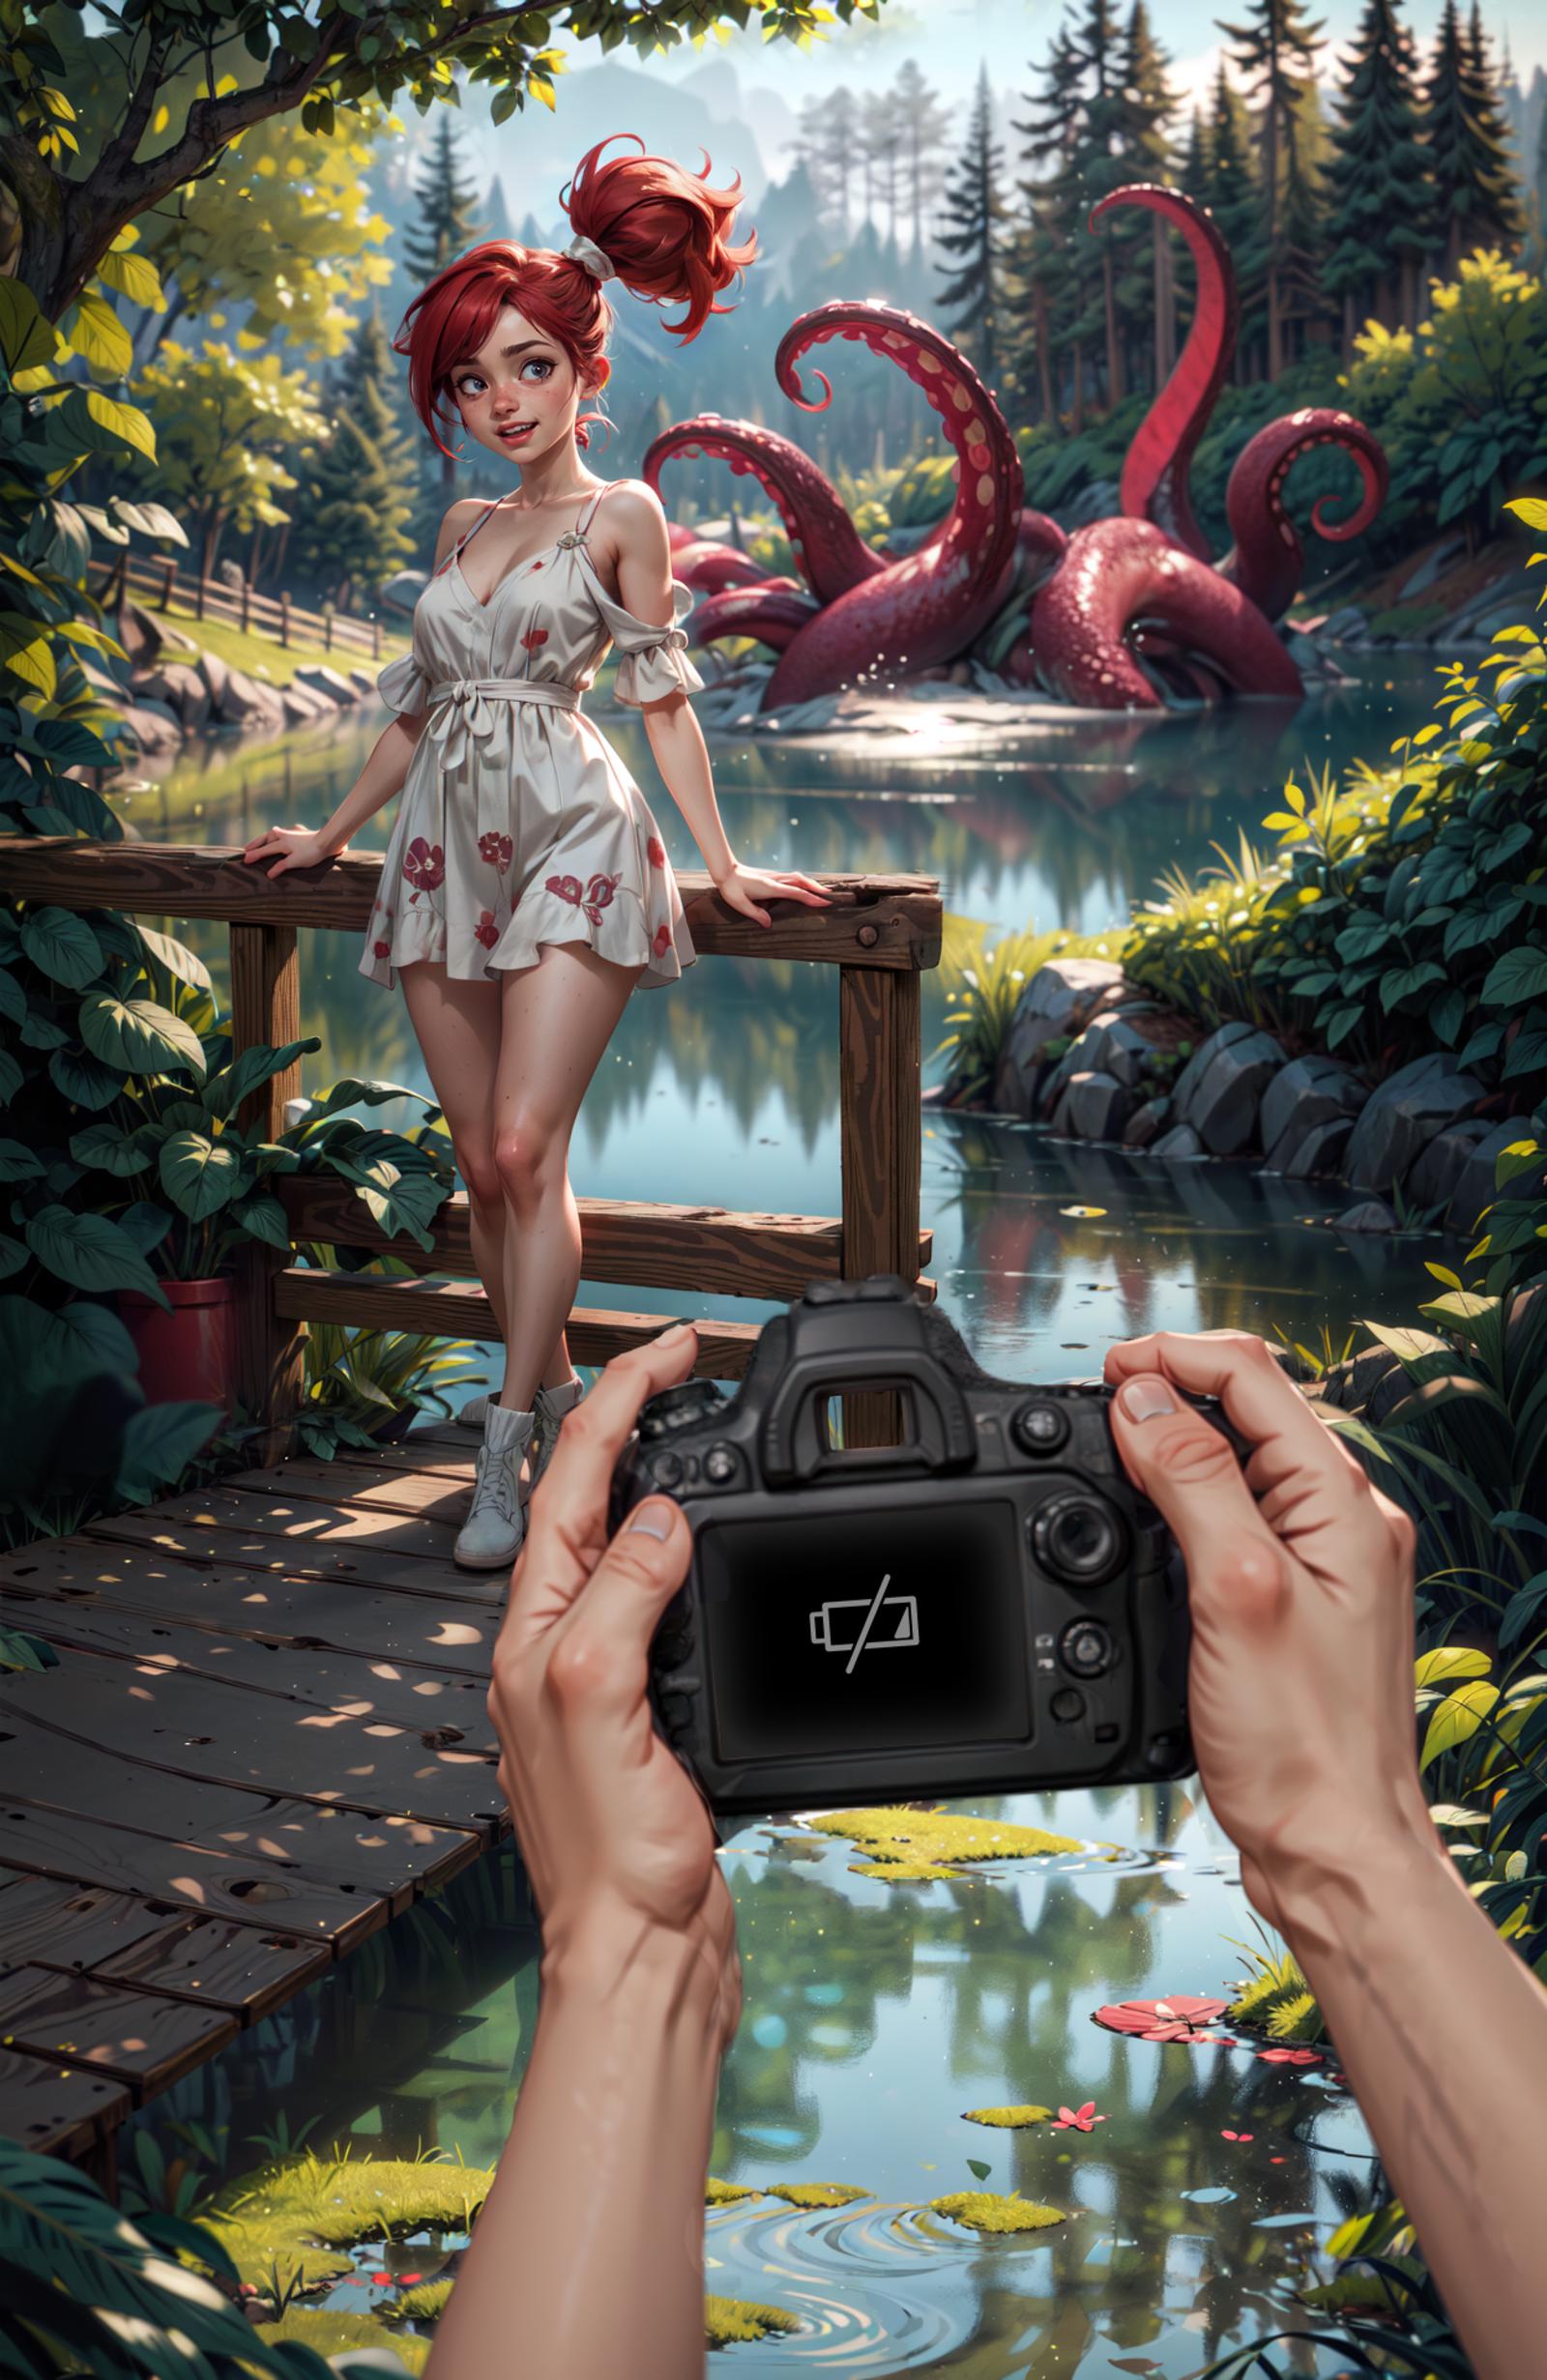 A person taking a photo of a woman in a dress near a waterway with an octopus in the background.